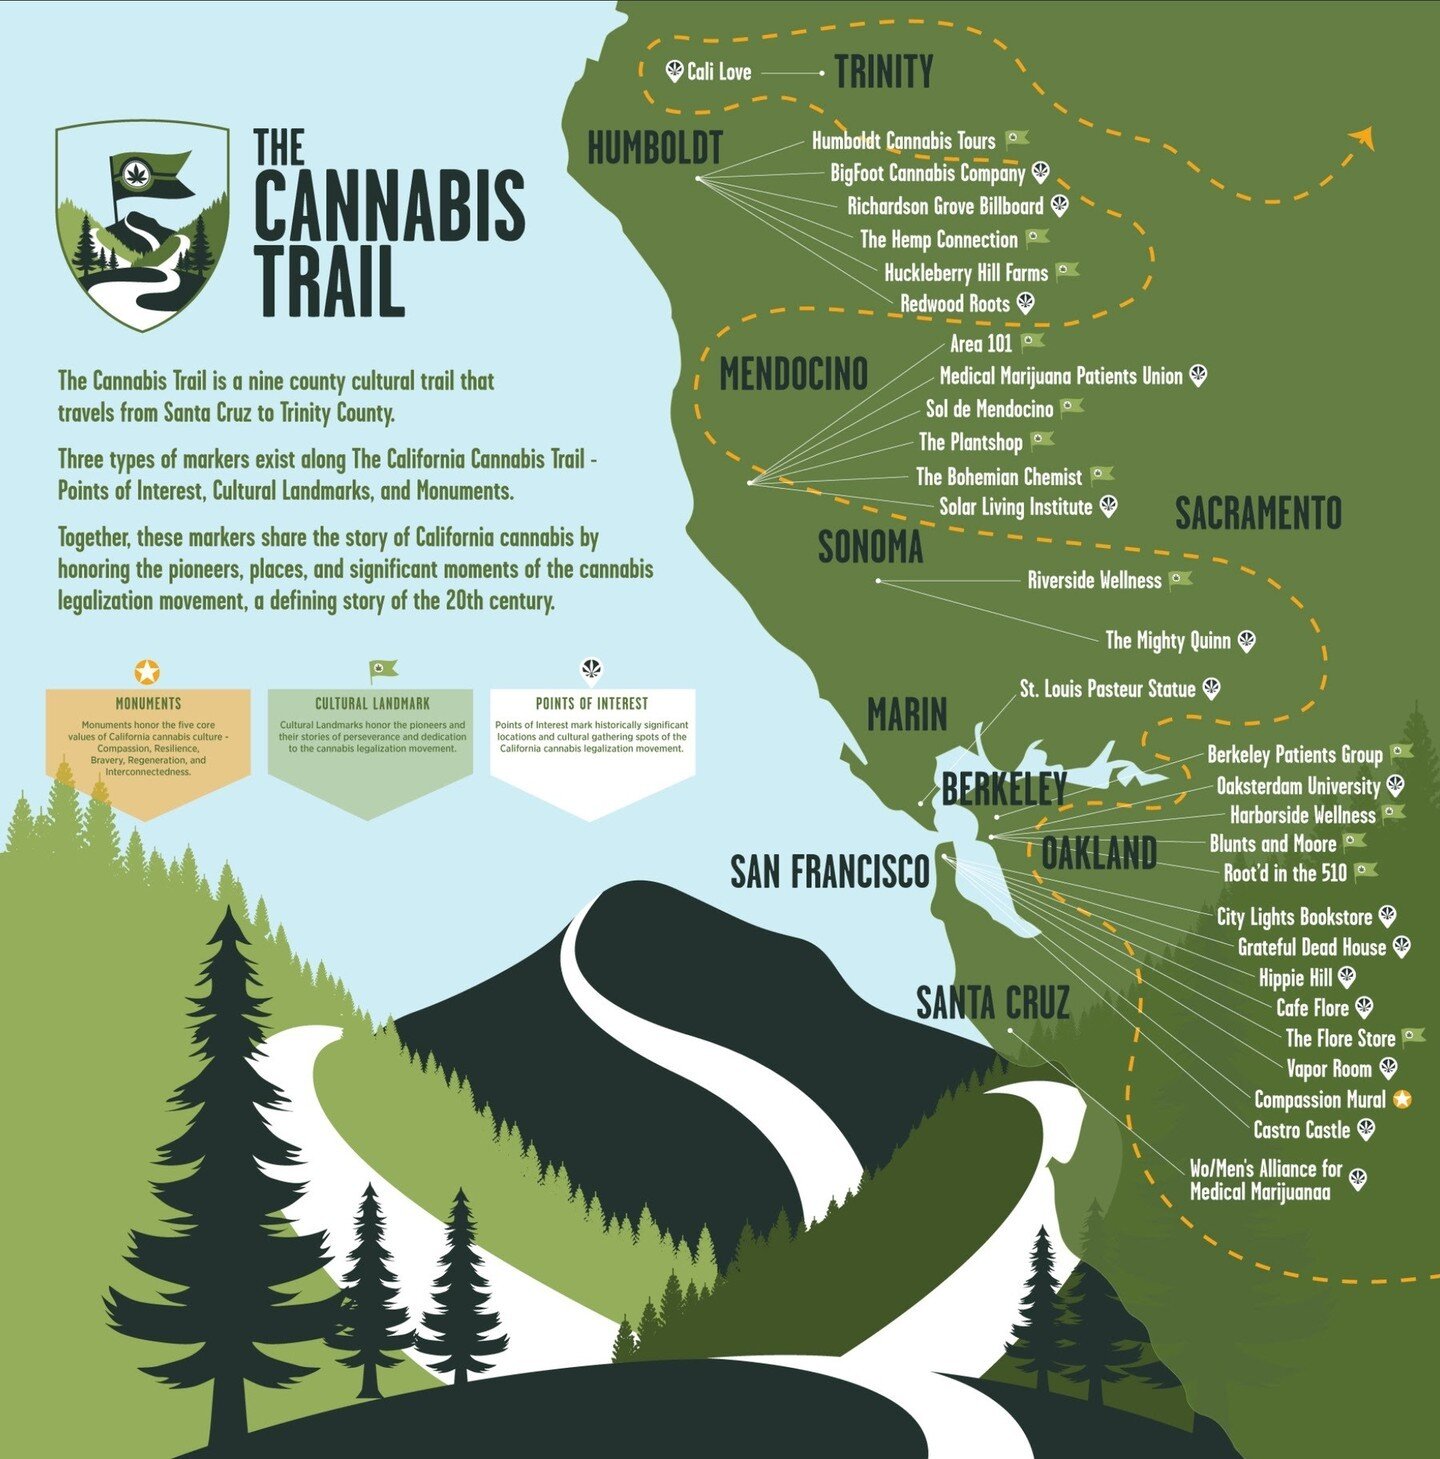 We are also thrilled to announce that we have been designated as a Cannabis Cultural Landmark as part of the California Cannabis Trail. ⁠
⁠
&ldquo;This landmark honors the story of Landrace cultivars, rare cannabinoids, the terroir and cultural canna